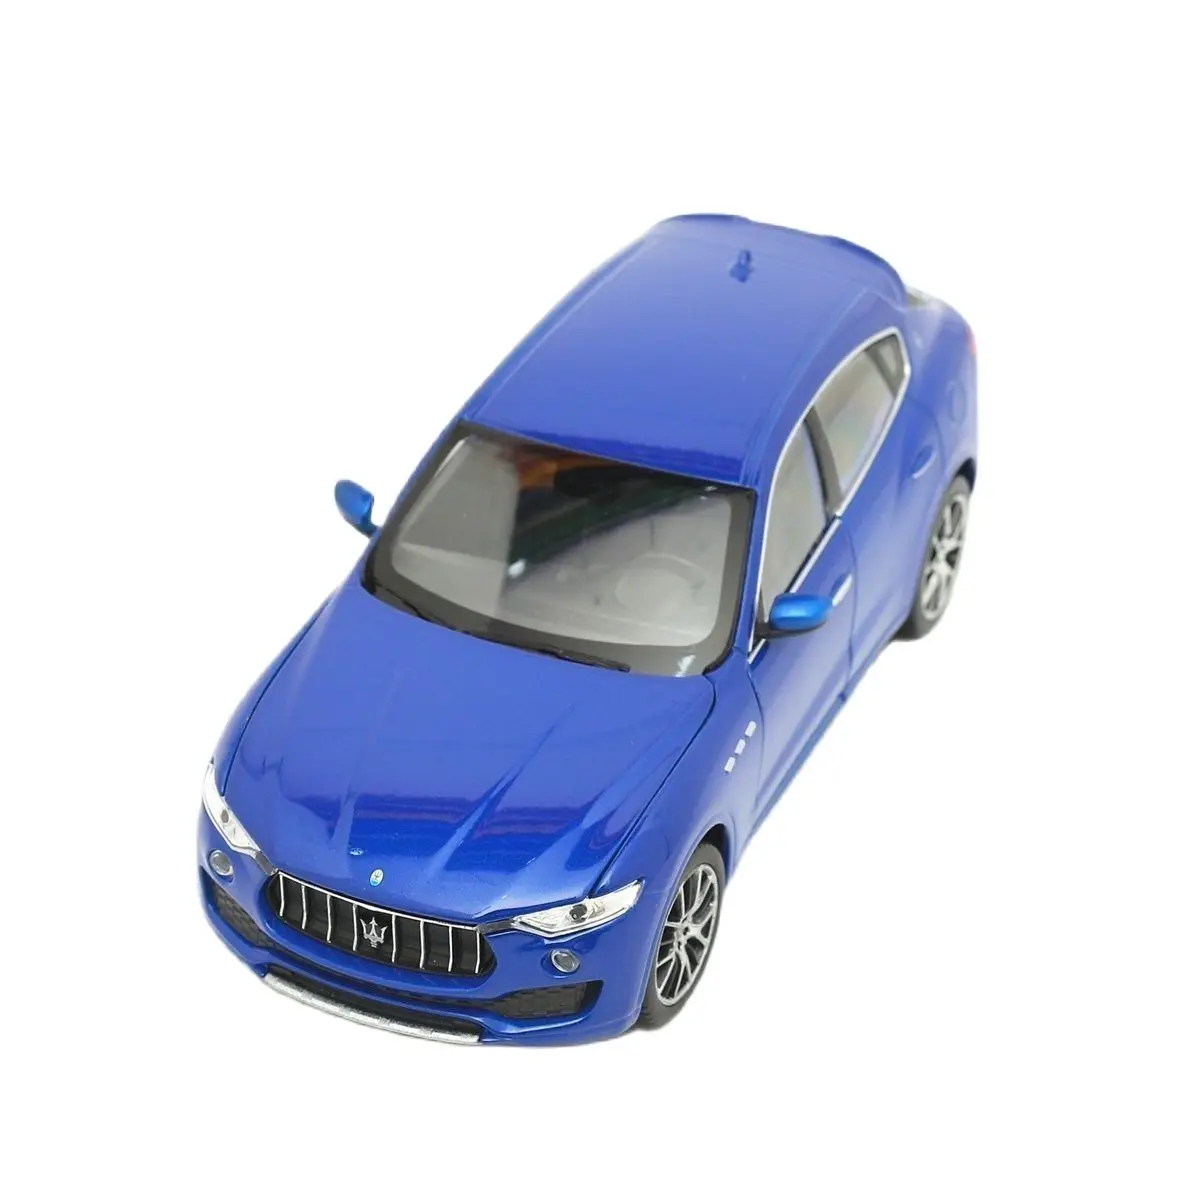 

WELLY 1:24 Maserati Levante SUV Alloy Luxury Vehicle Diecast Pull Back Cars Model Toy Collection